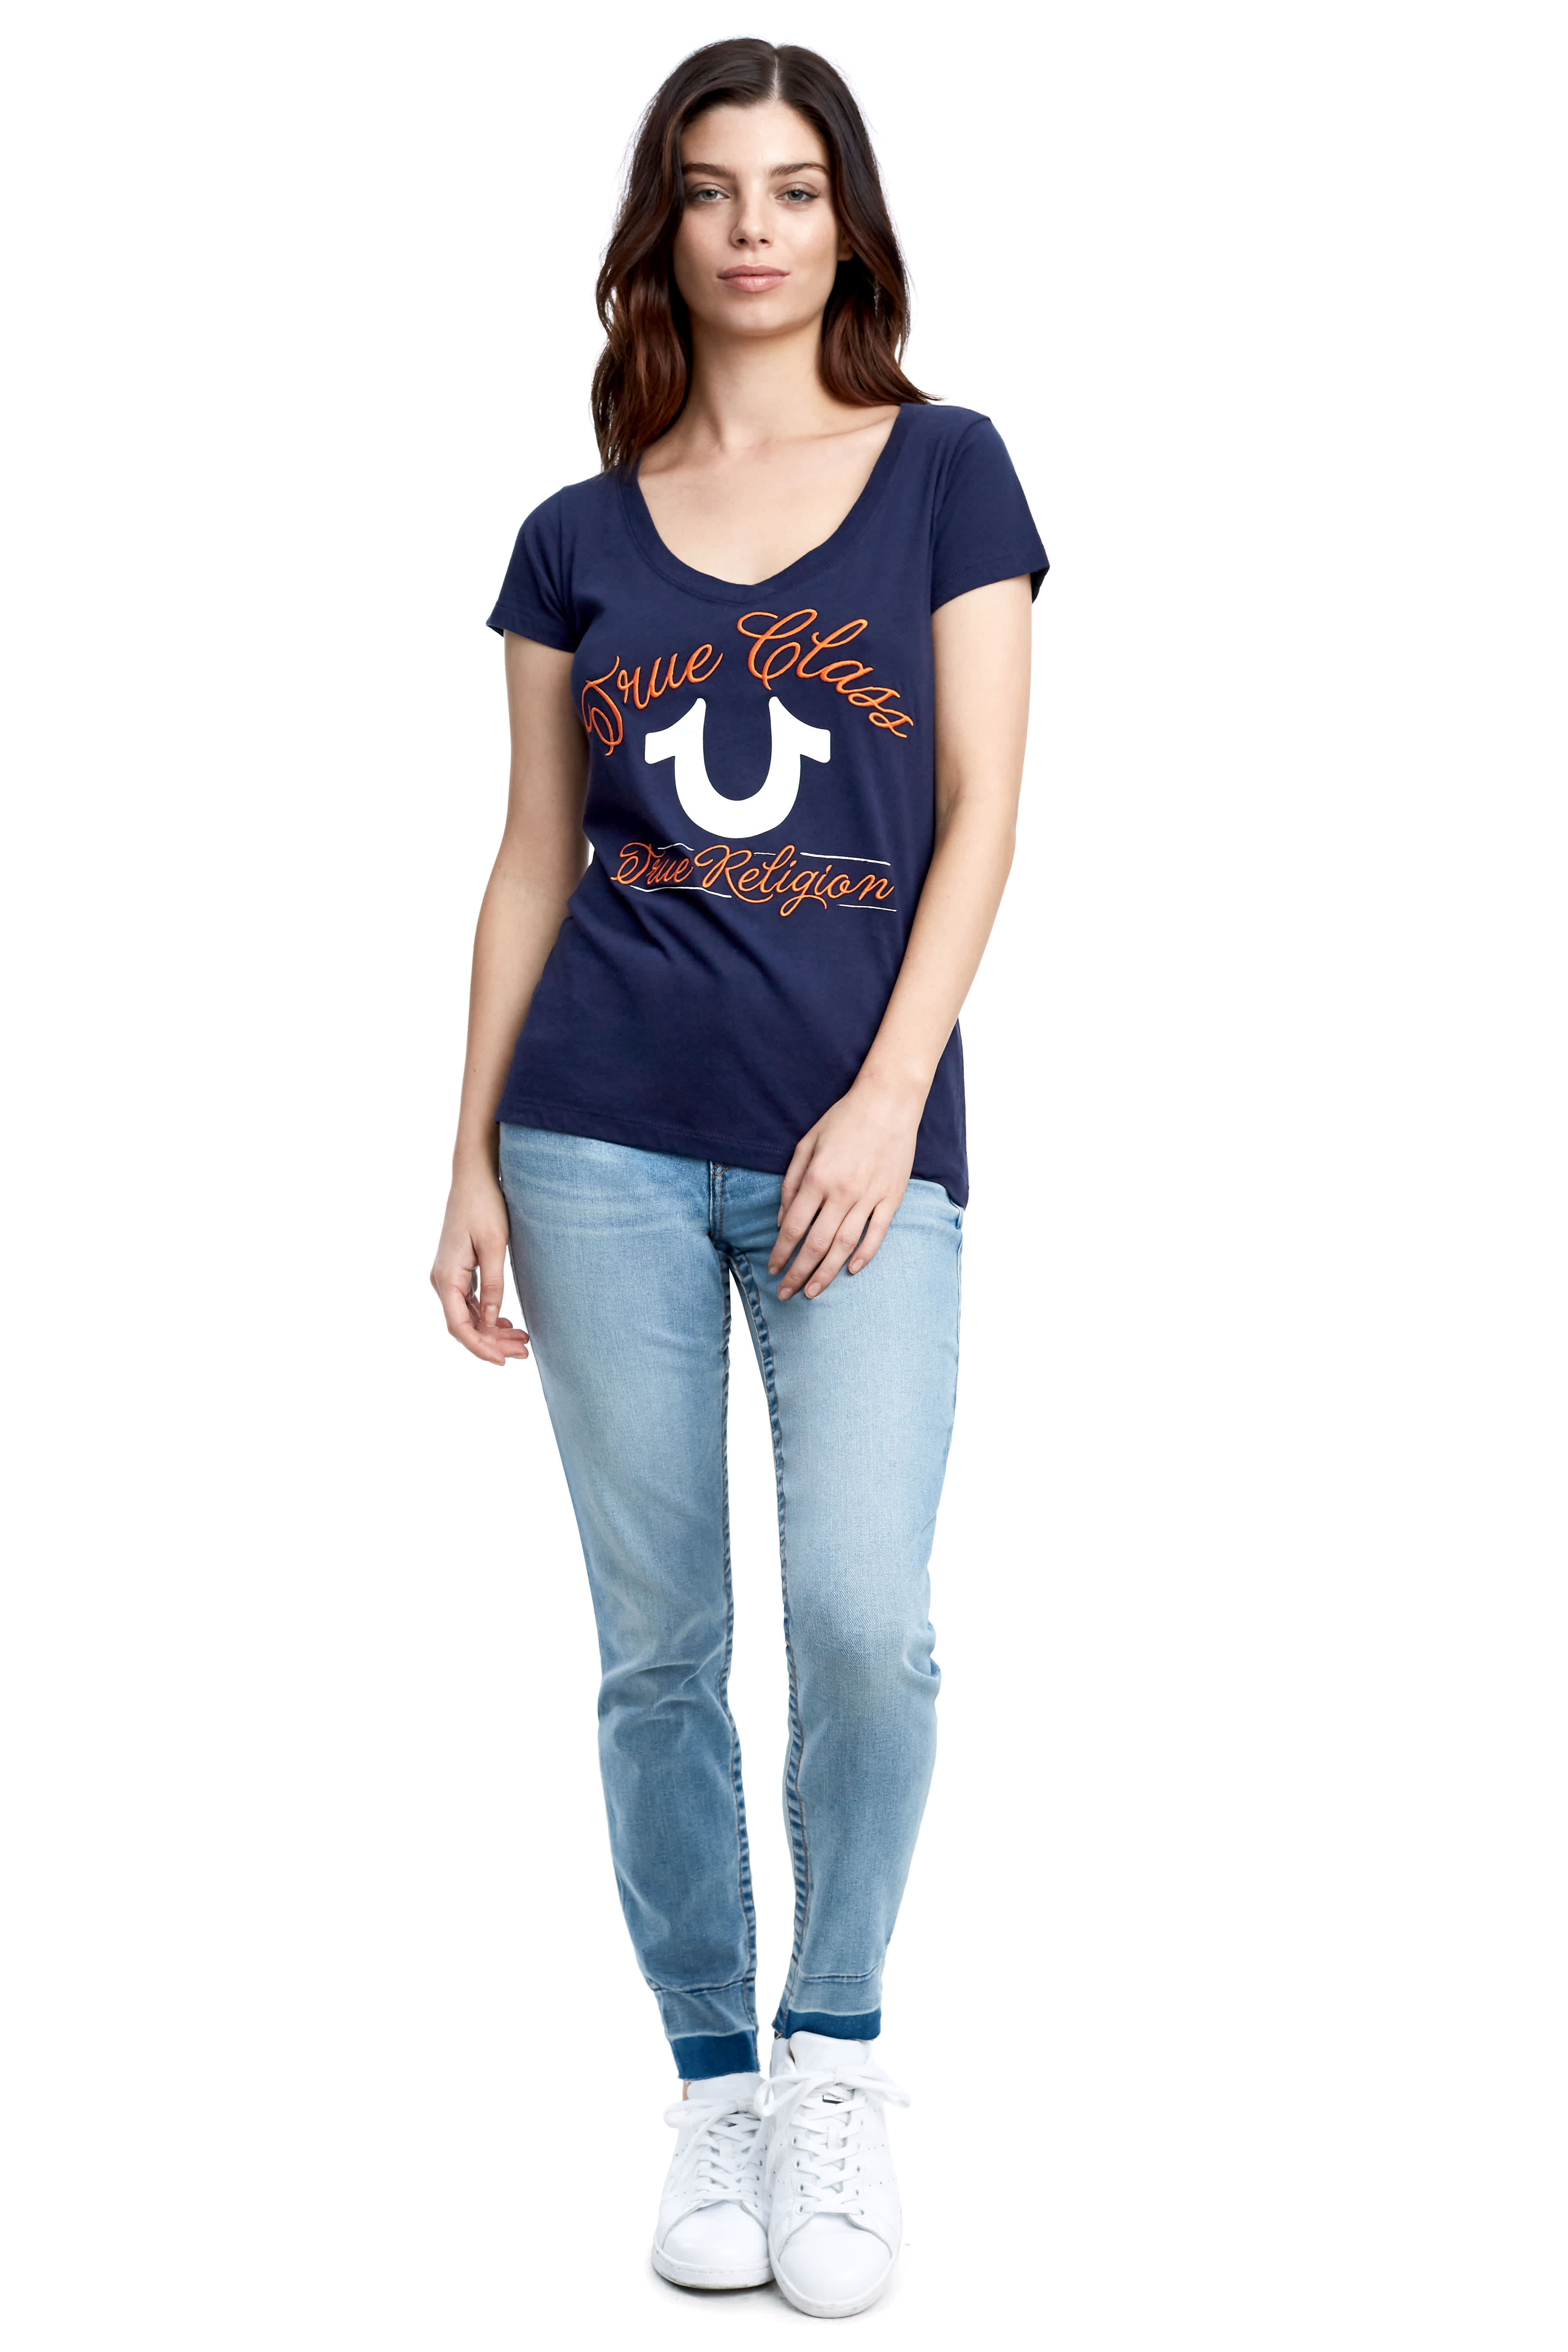 TRUE CLASS EMBROIDERED WOMENS V NECK TEE